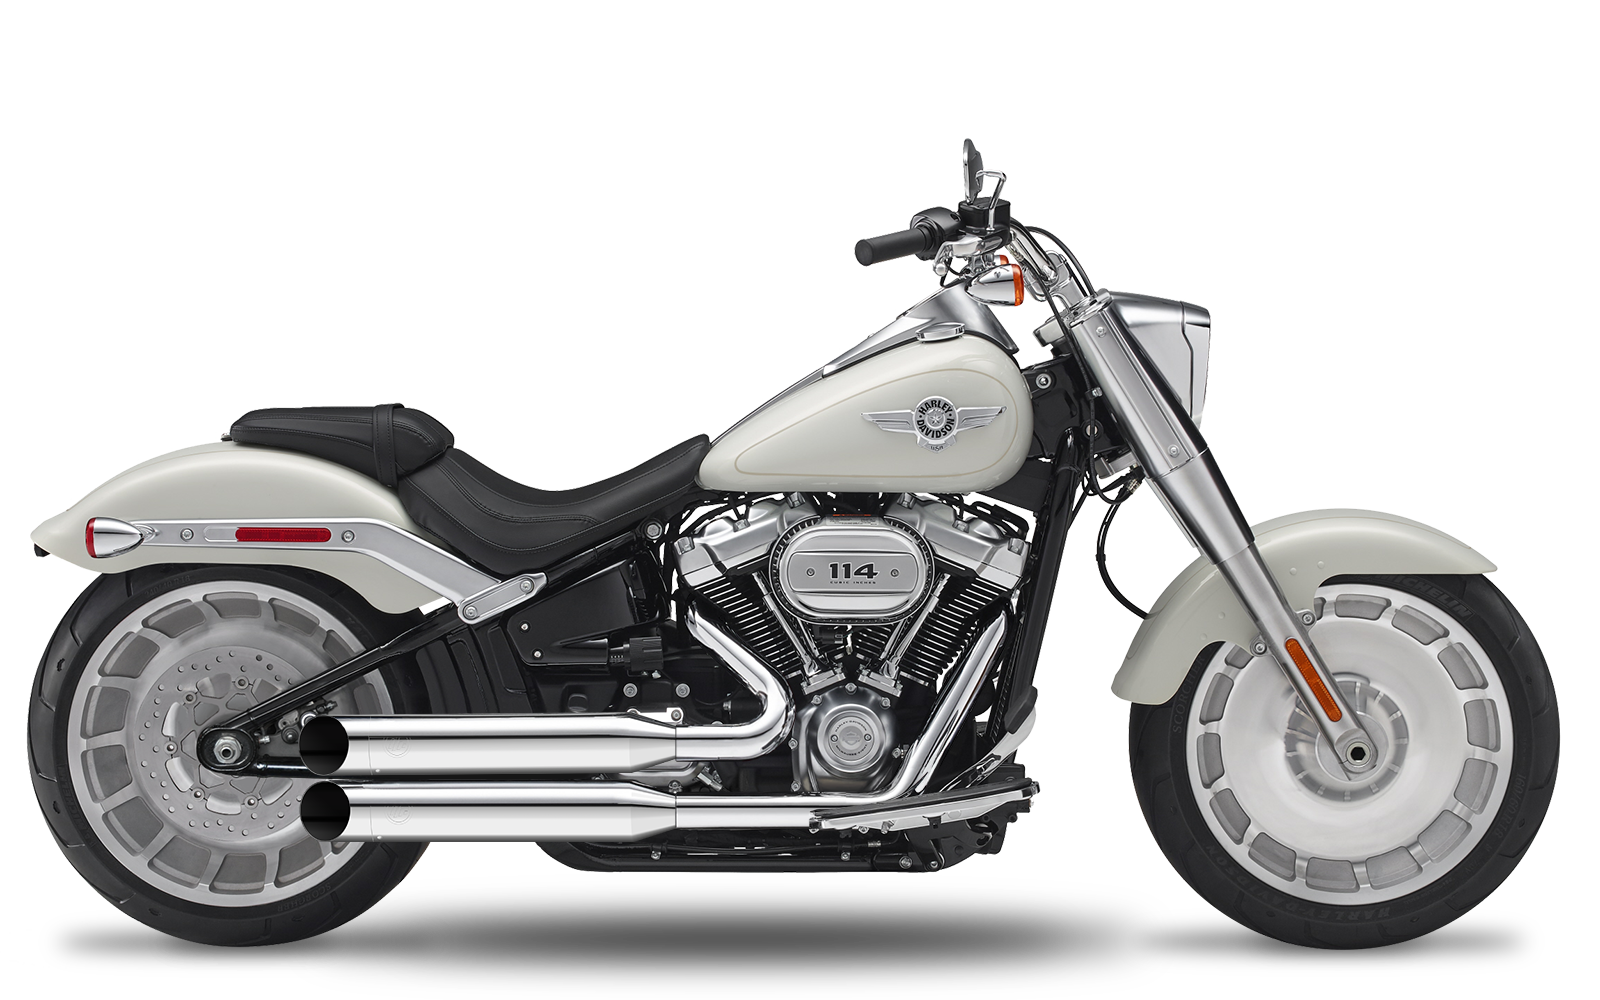 CRUISER/SOFTAIL - Fat Boy 114 / S - ME114 - 2018-2020 - Complete systems adjustable